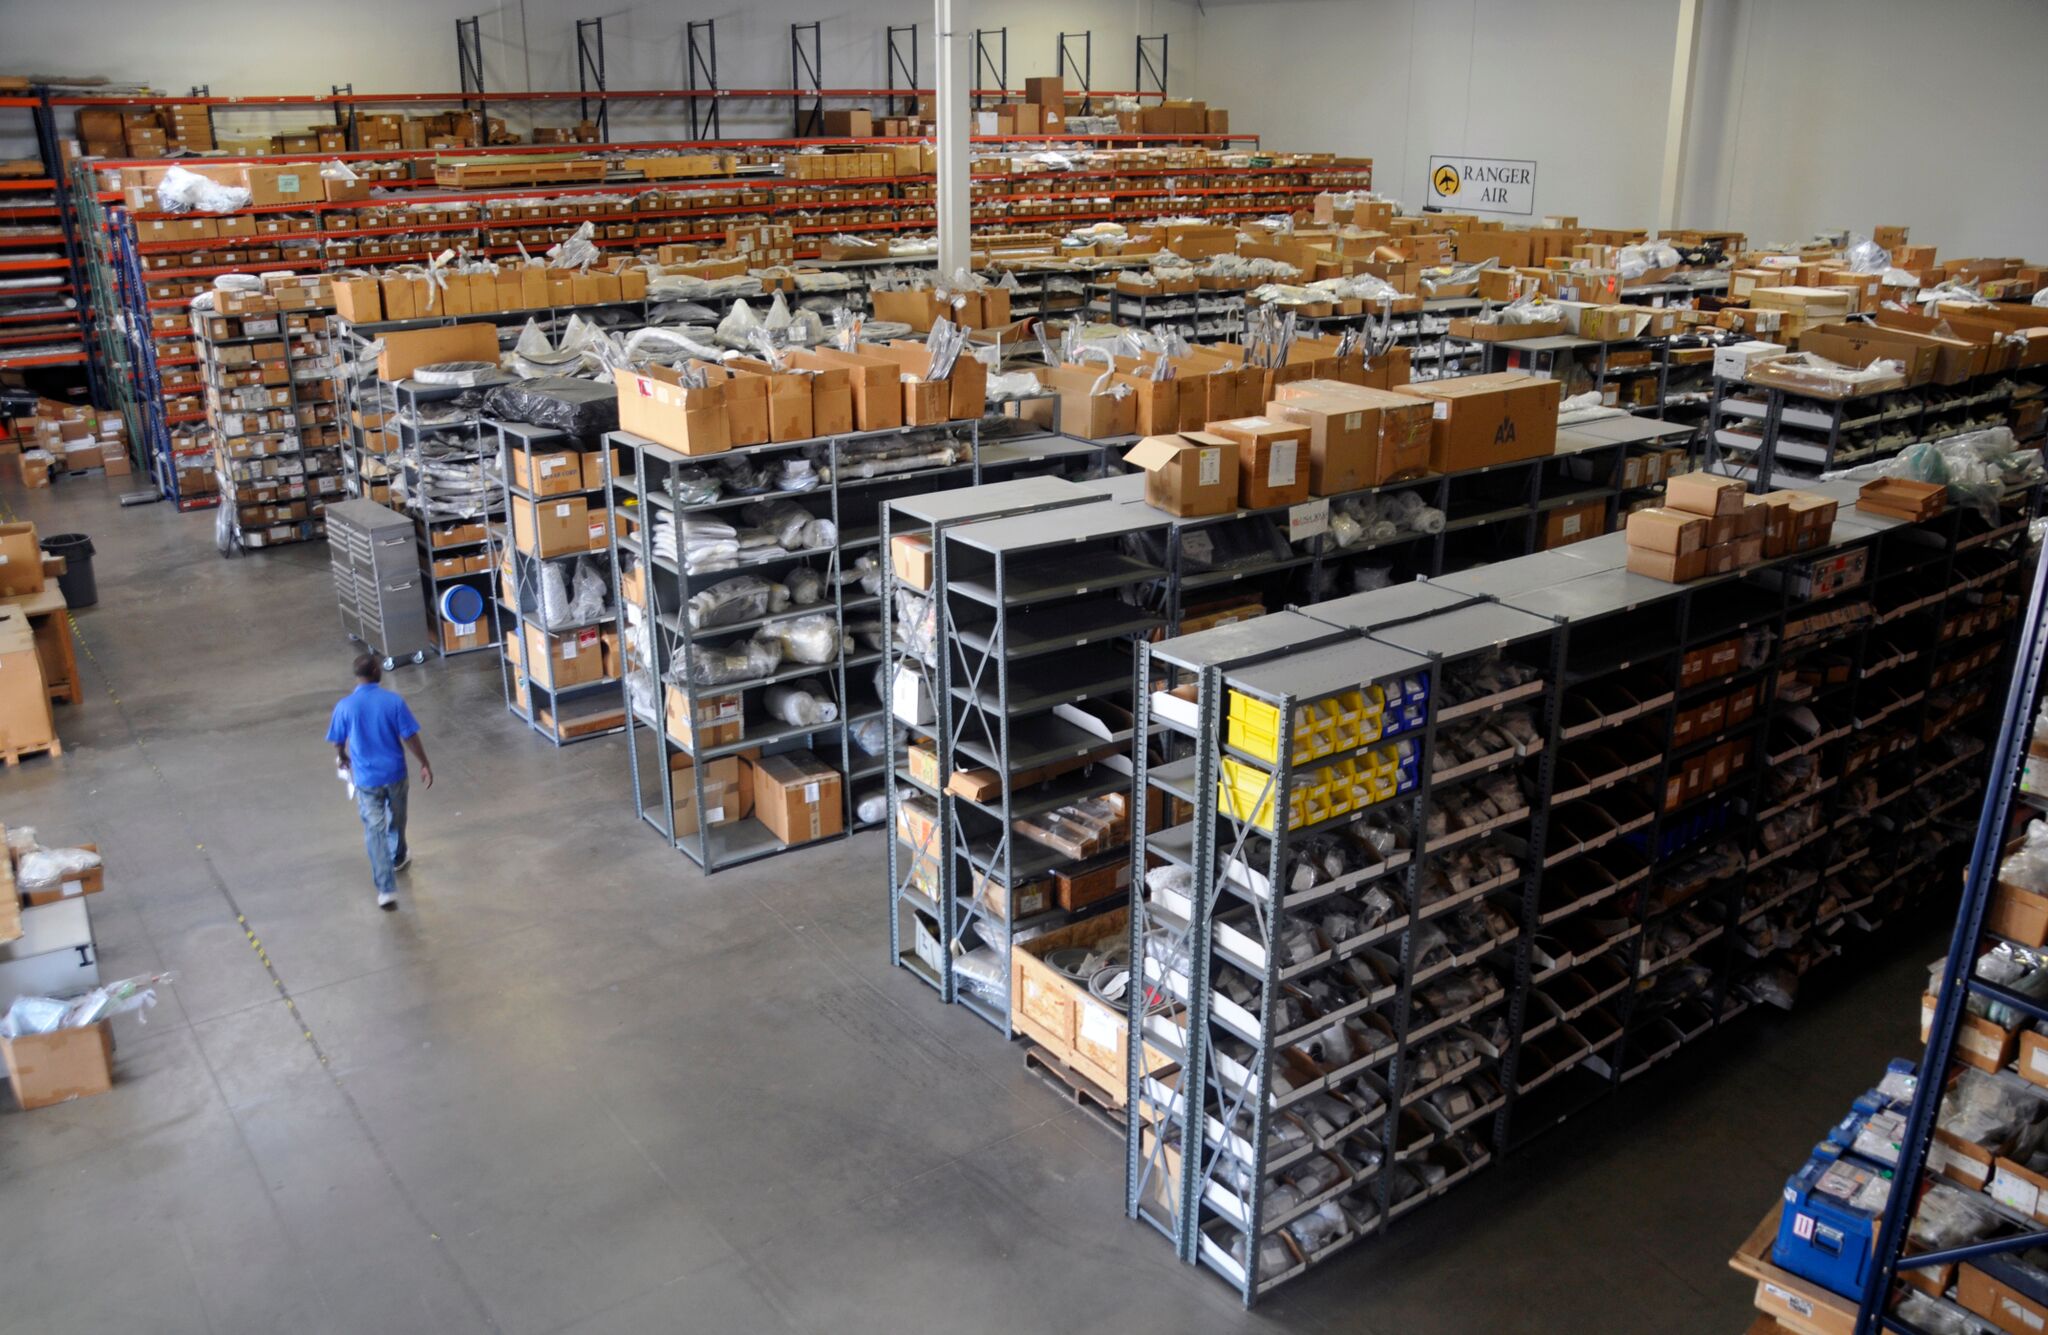 We stock and trade in virtually every commercial airframe and engine rotable in the world